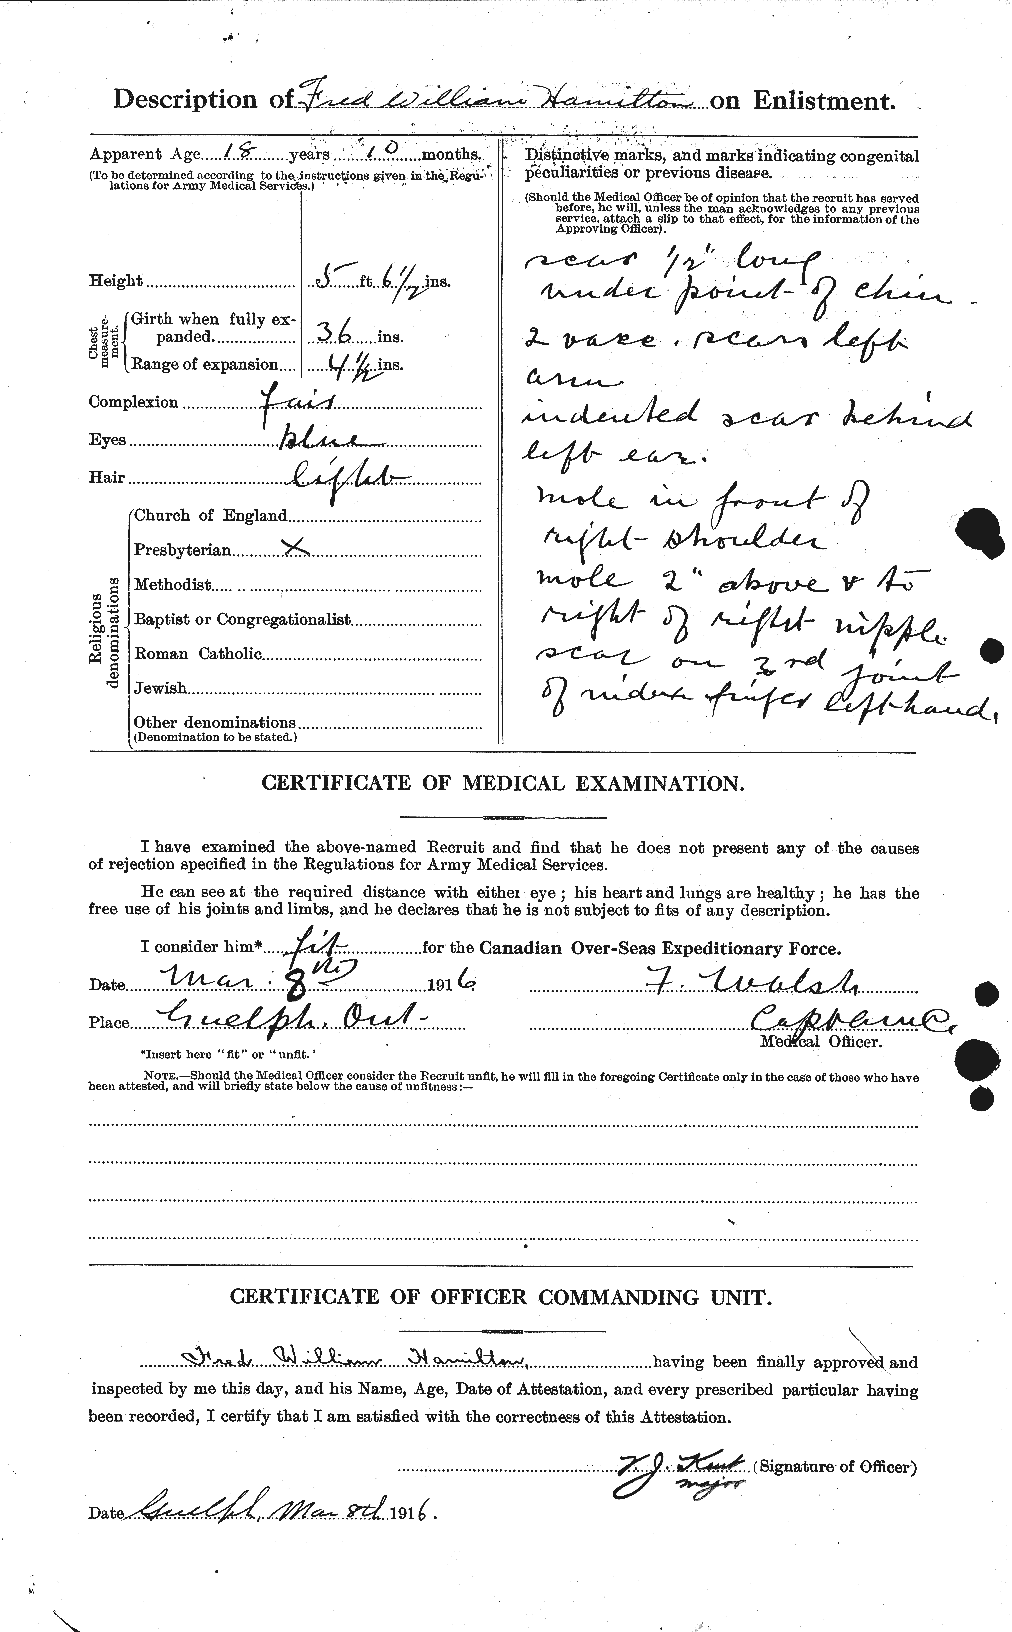 Personnel Records of the First World War - CEF 372400b